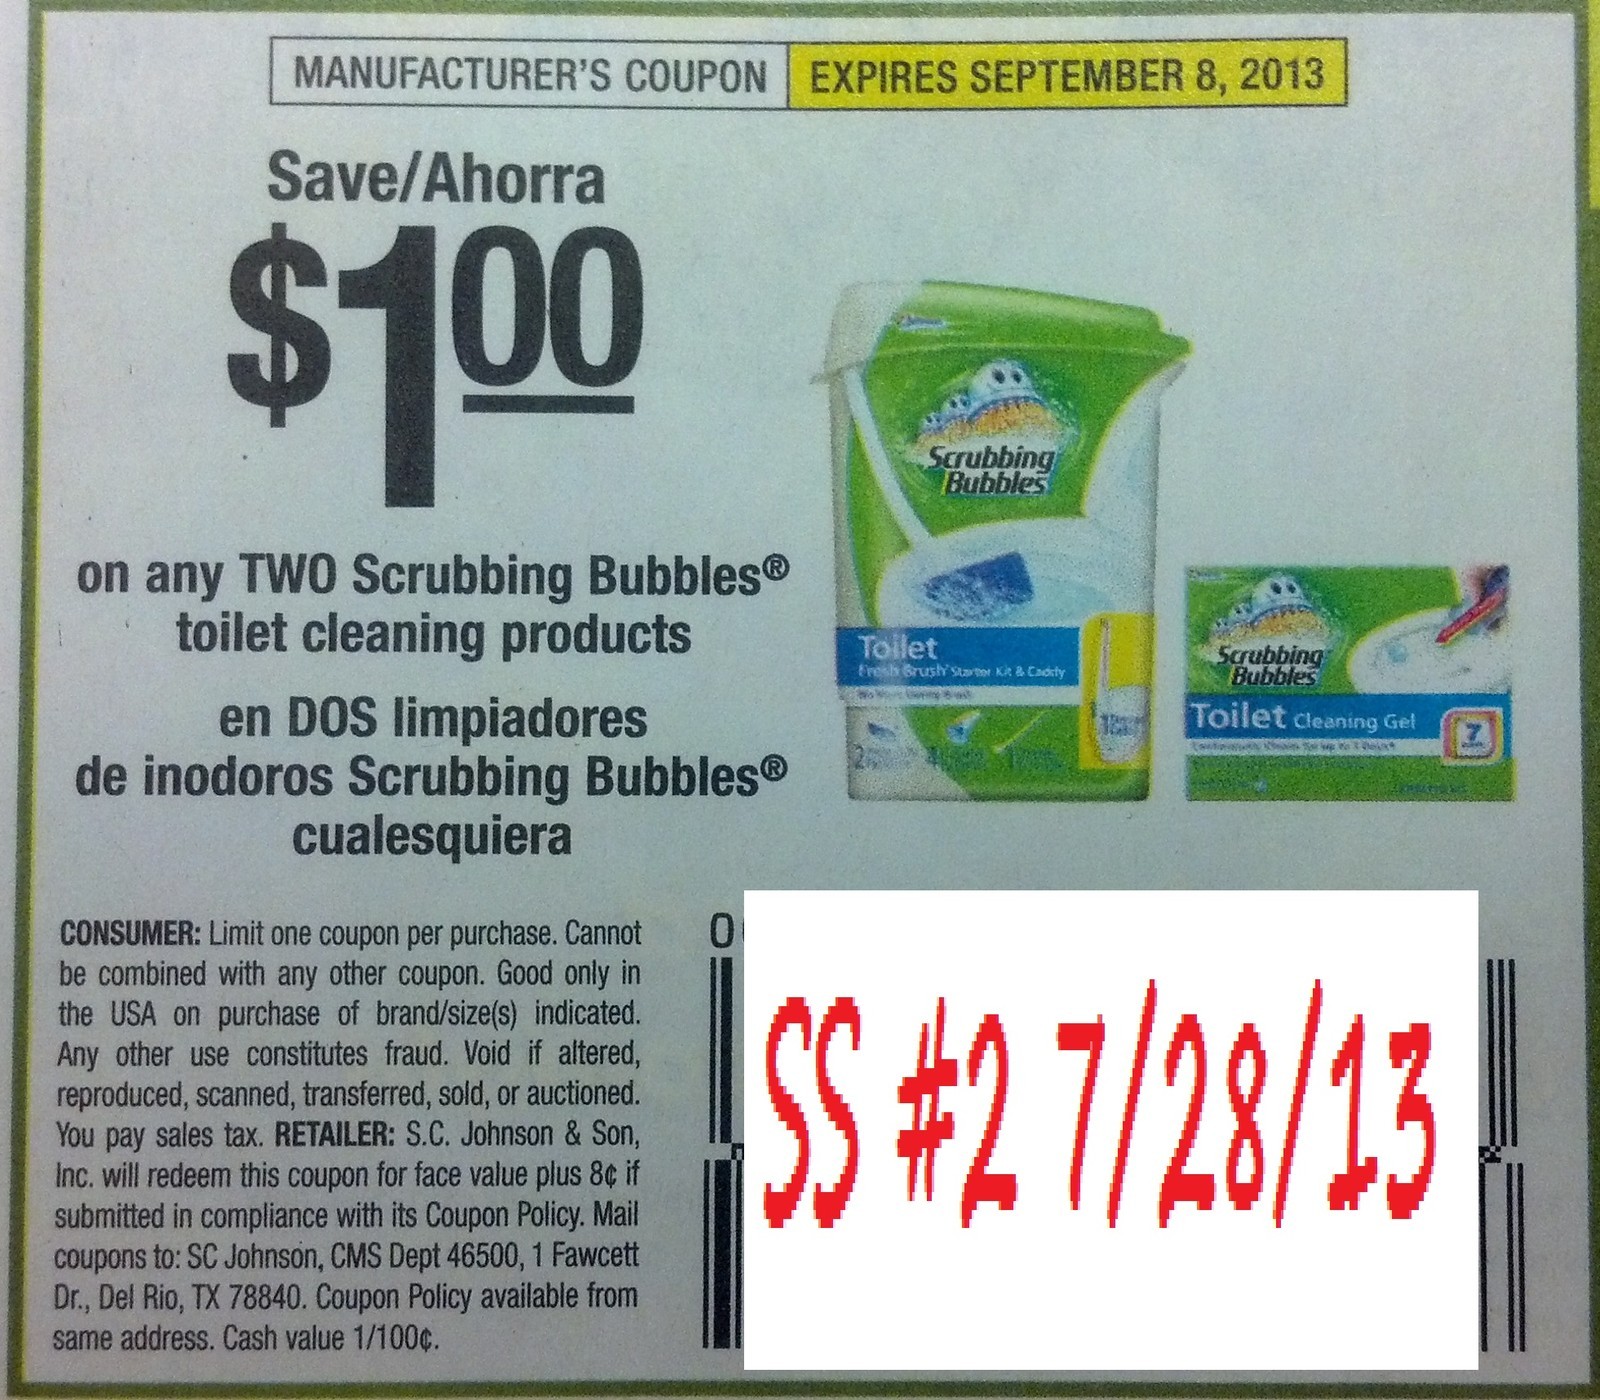 Save $1.00 on any TWO Scrubbing Bubbles toliet cleaning products Expires 09/08/2013